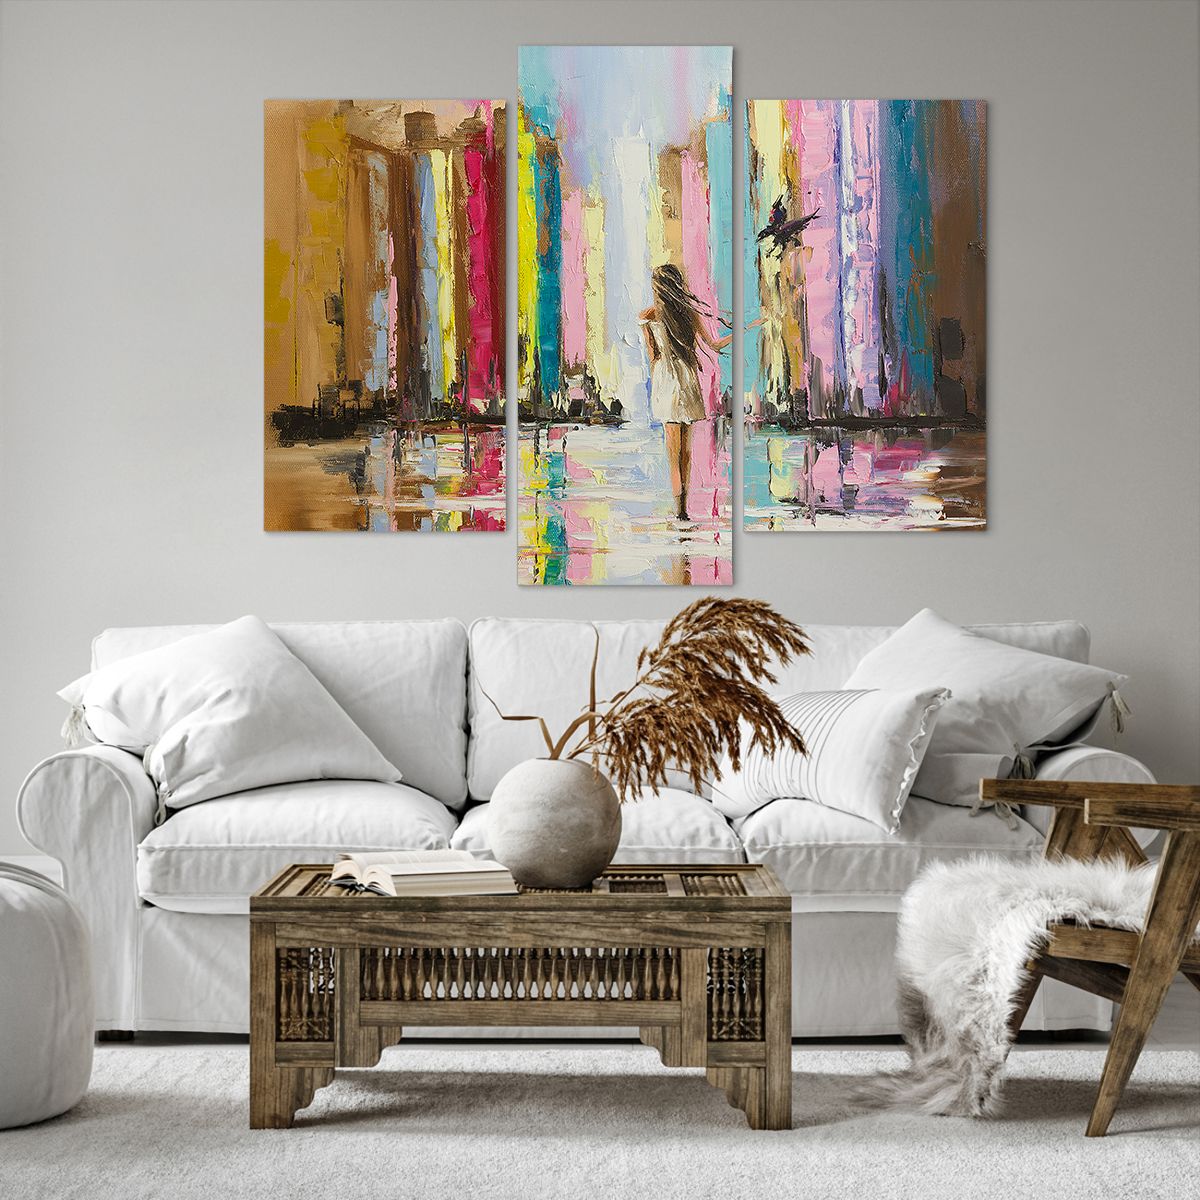 Impression sur toile Abstraction, Impression sur toile Fille, Impression sur toile Femme, Impression sur toile Architecture, Impression sur toile Art